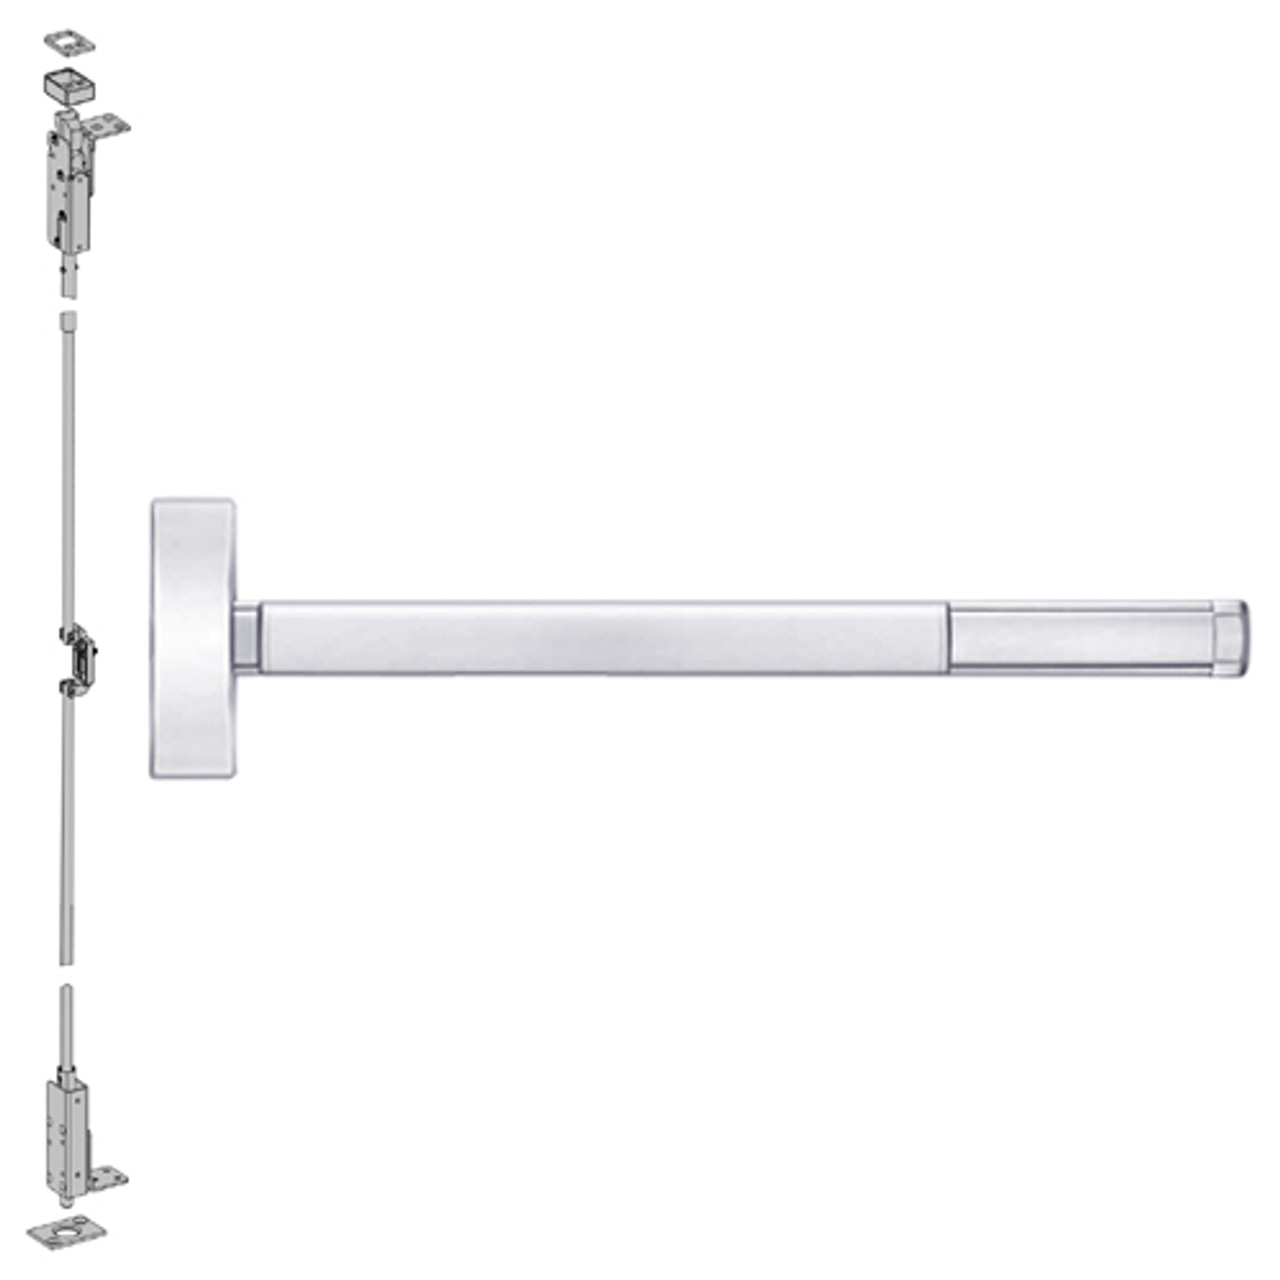 2715LBRCD-625-36 PHI 2700 Series Wood Door Concealed Vertical Rod Device Prepped for Thumbpiece Always Active with Less Bottom Rod in Bright Chrome Finish